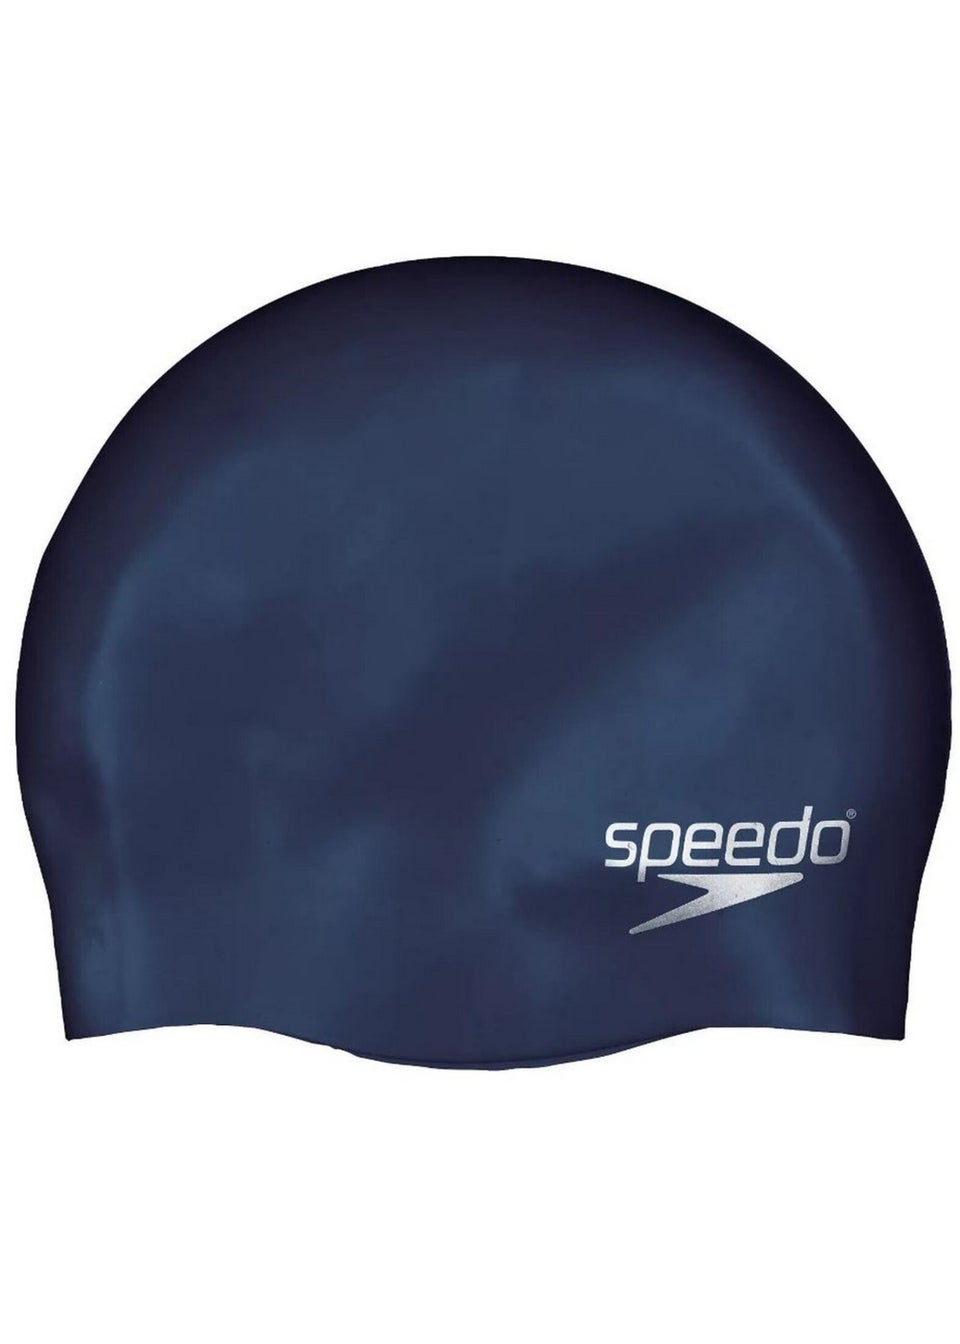 Speedo Kids Navy Moulded Silicone Swimming Cap